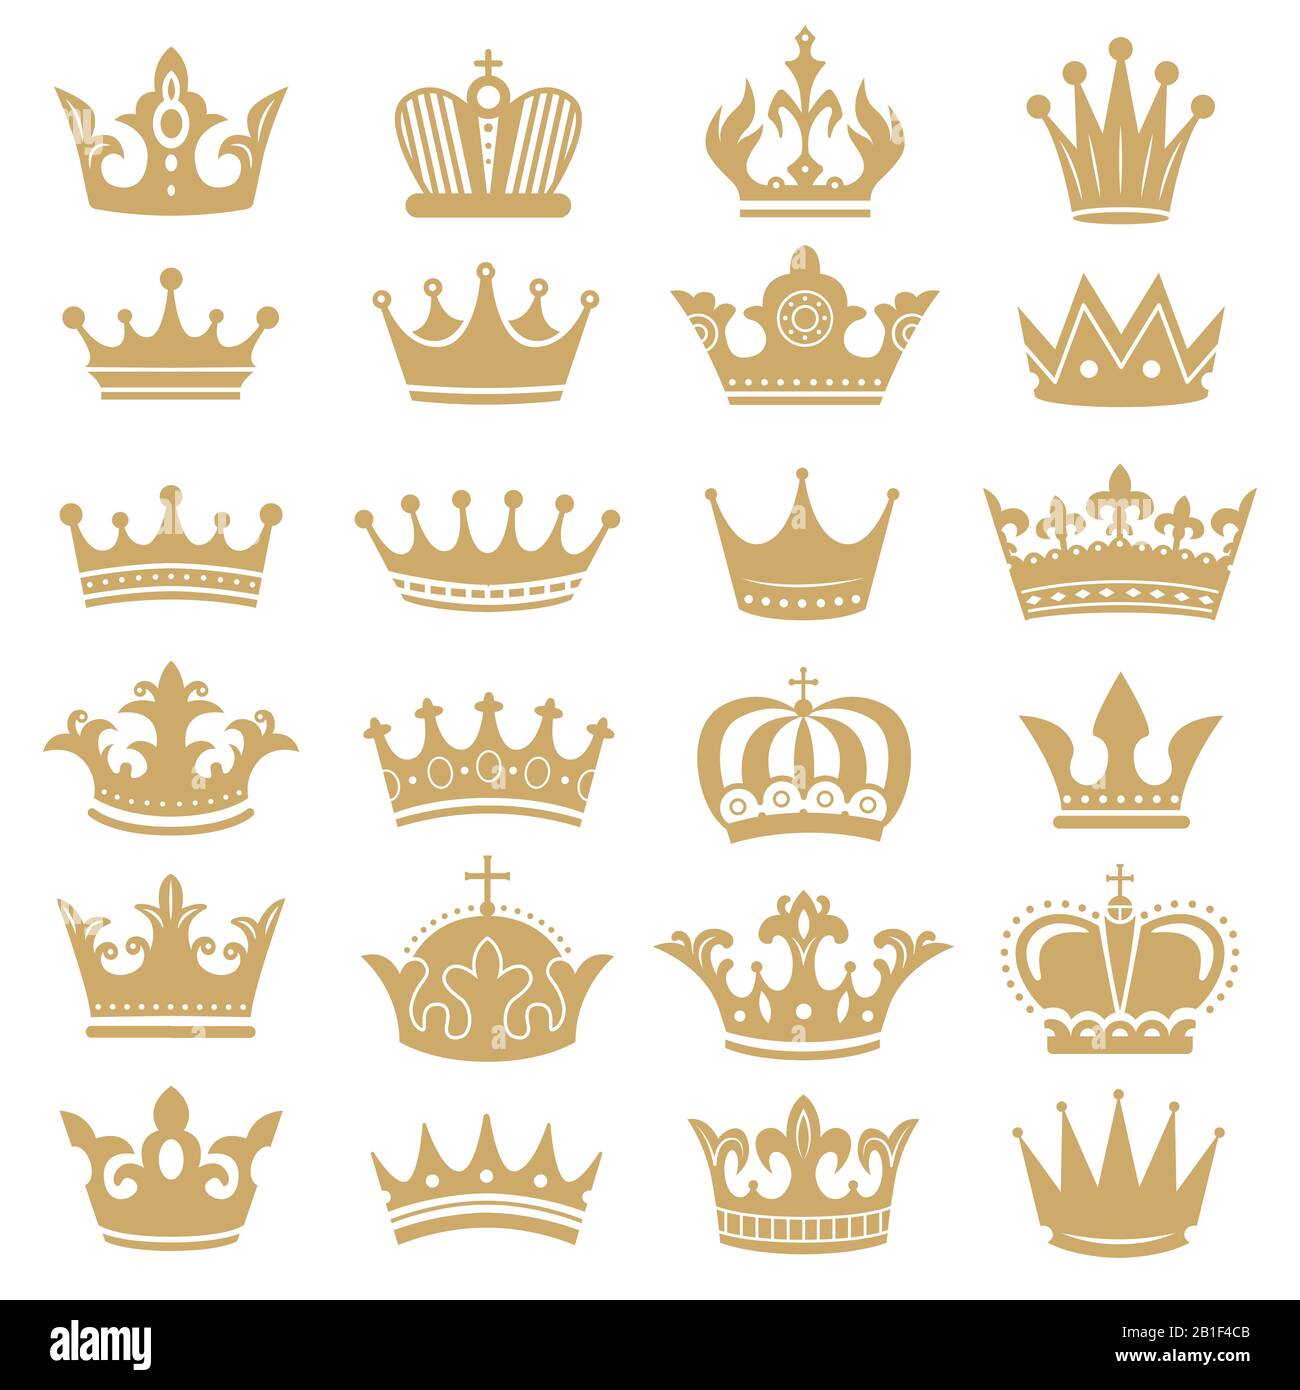 Gold crown silhouette. Royal crowns, coronation king and luxury queen tiara silhouettes icons vector set Stock Vector